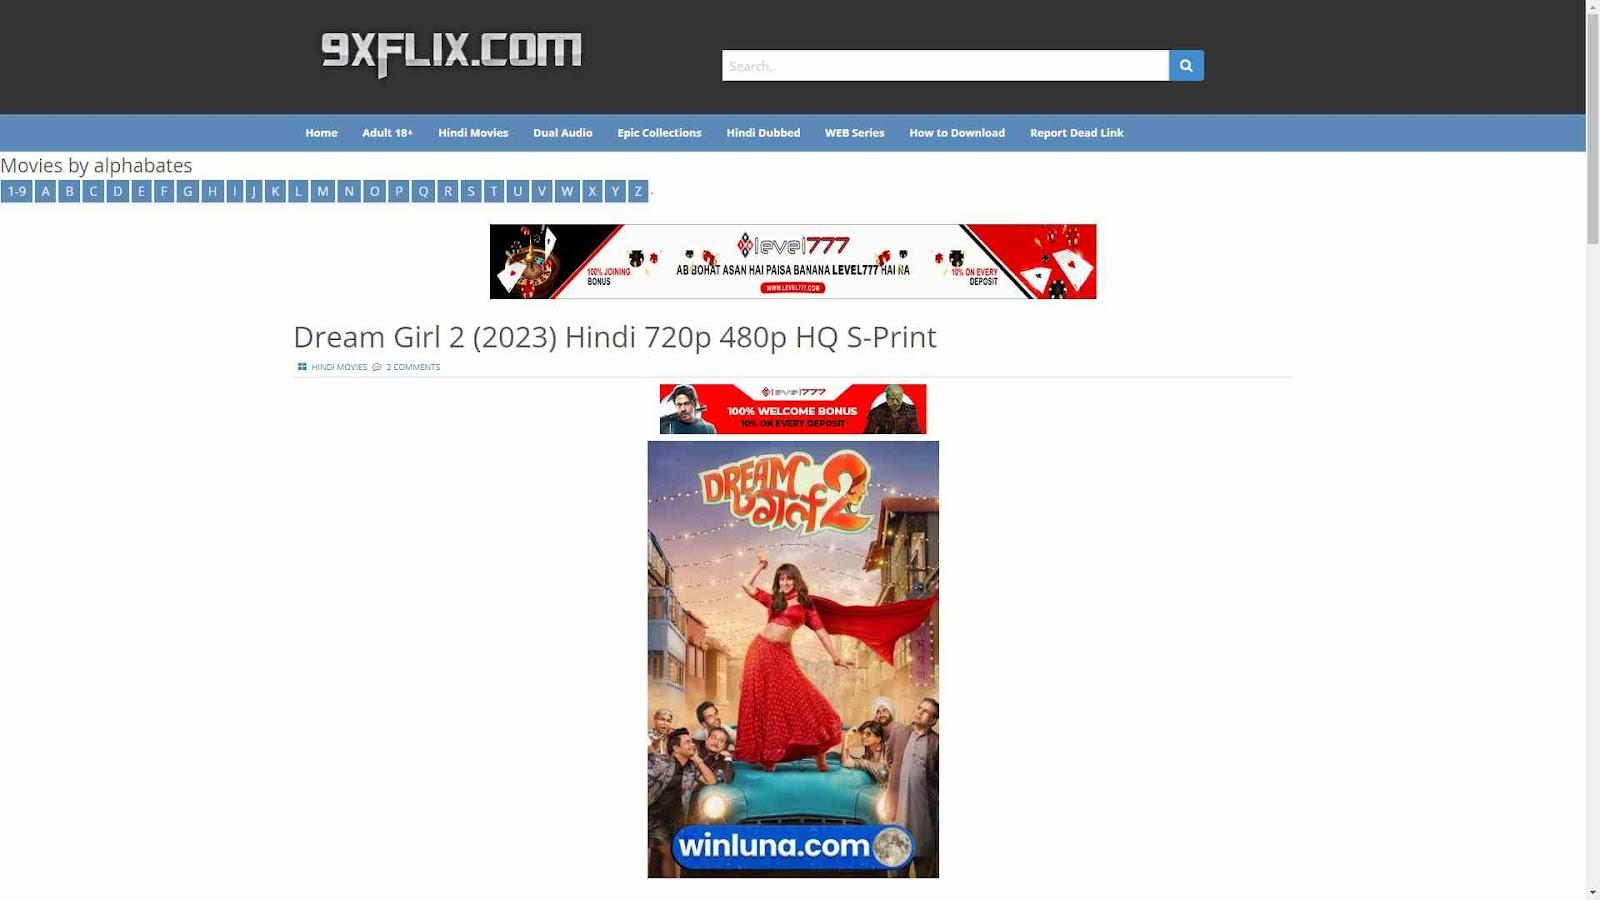 How to Download 9xflix com Movies and Series and How We Can Use It